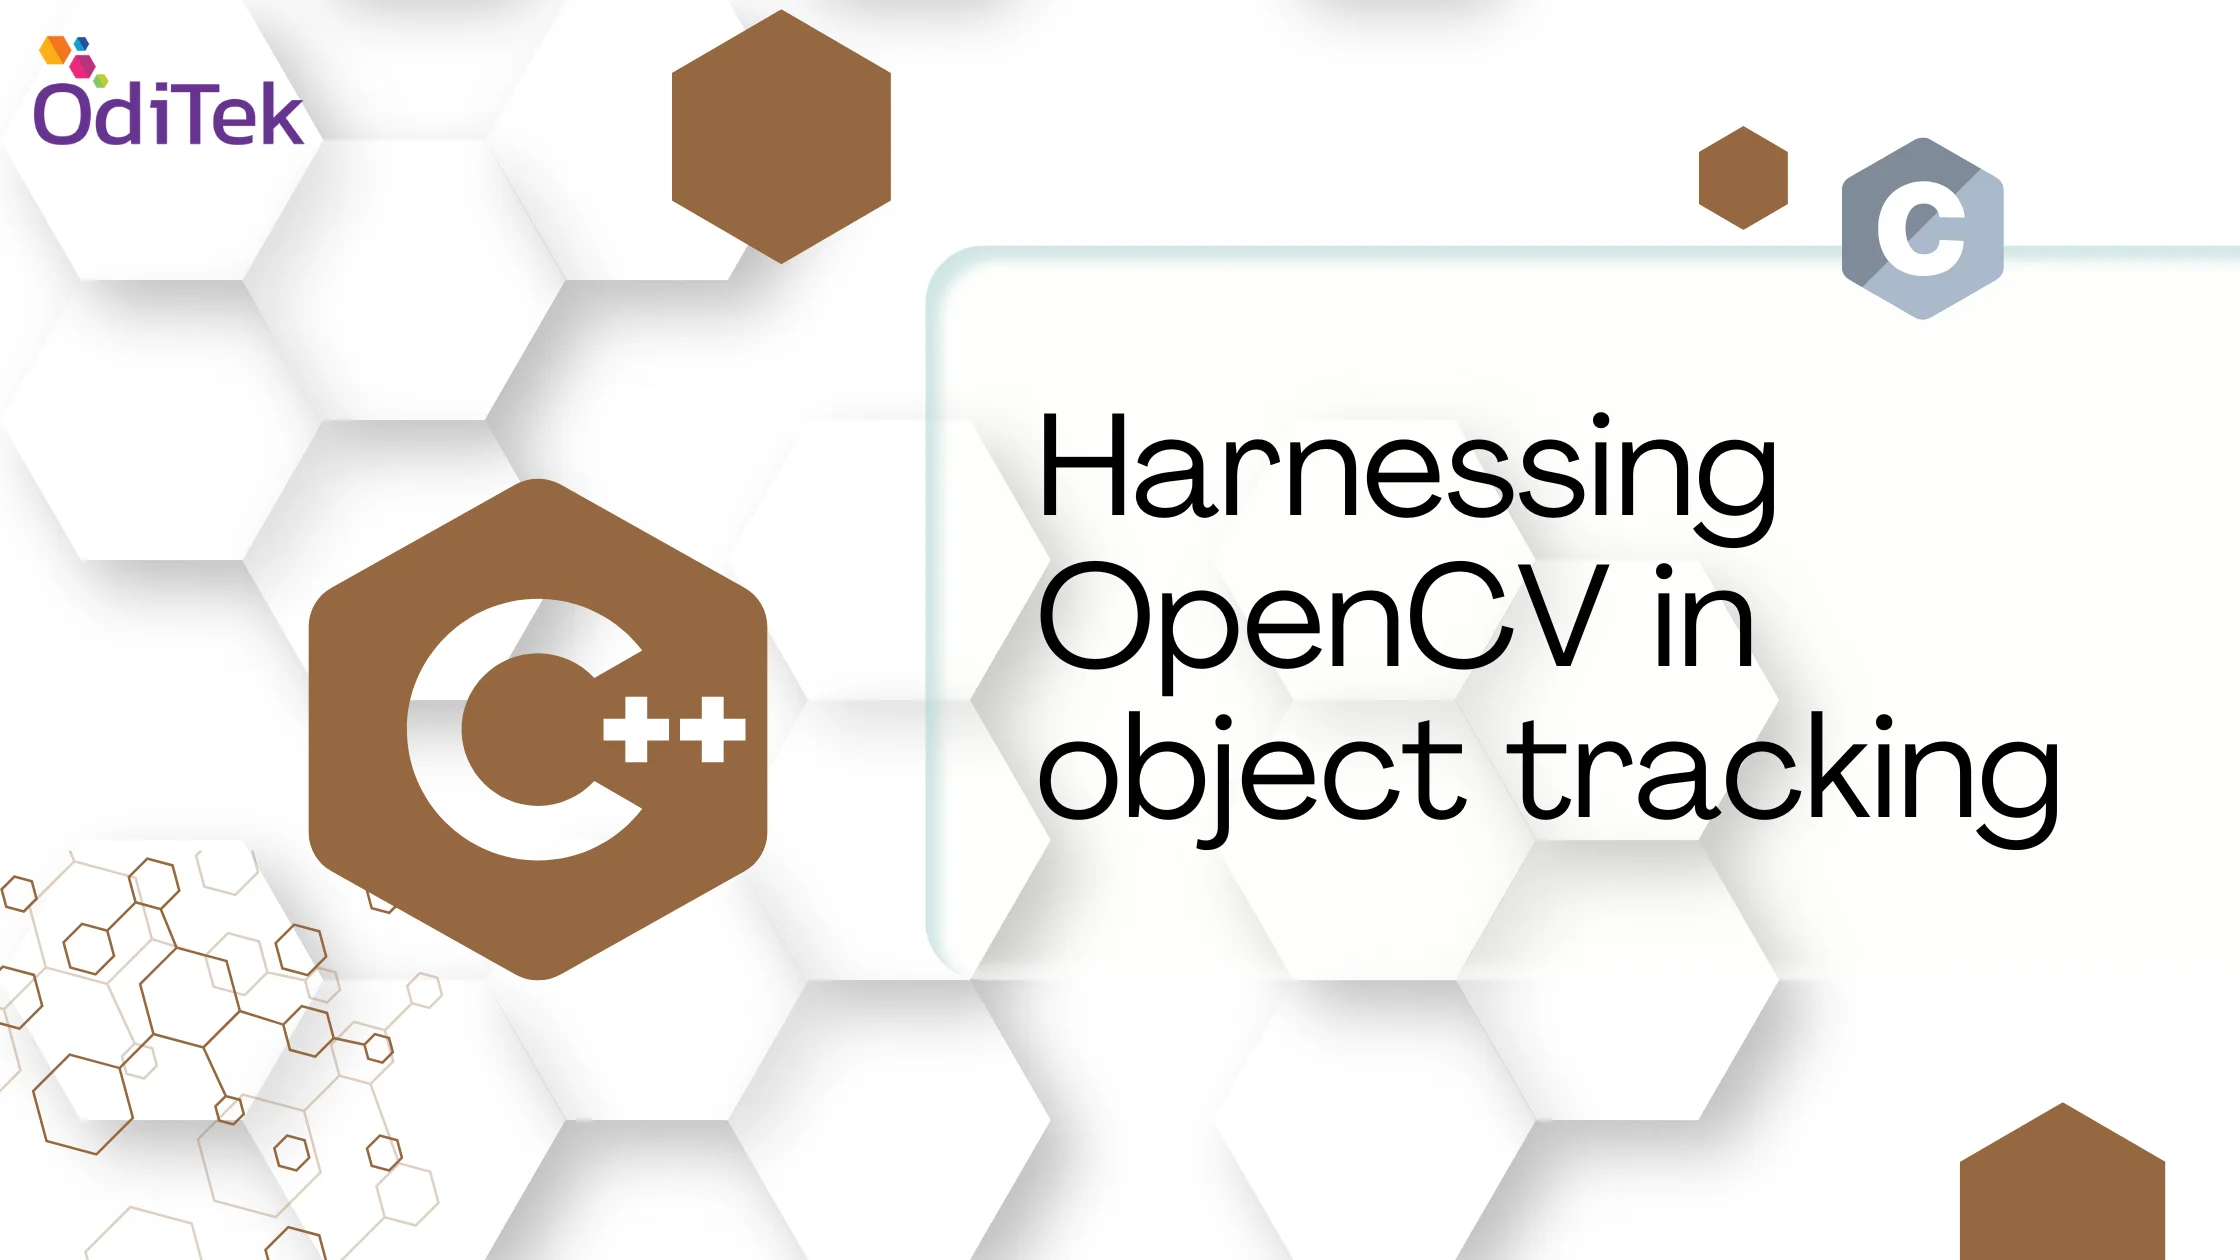 OpenCV object tracking